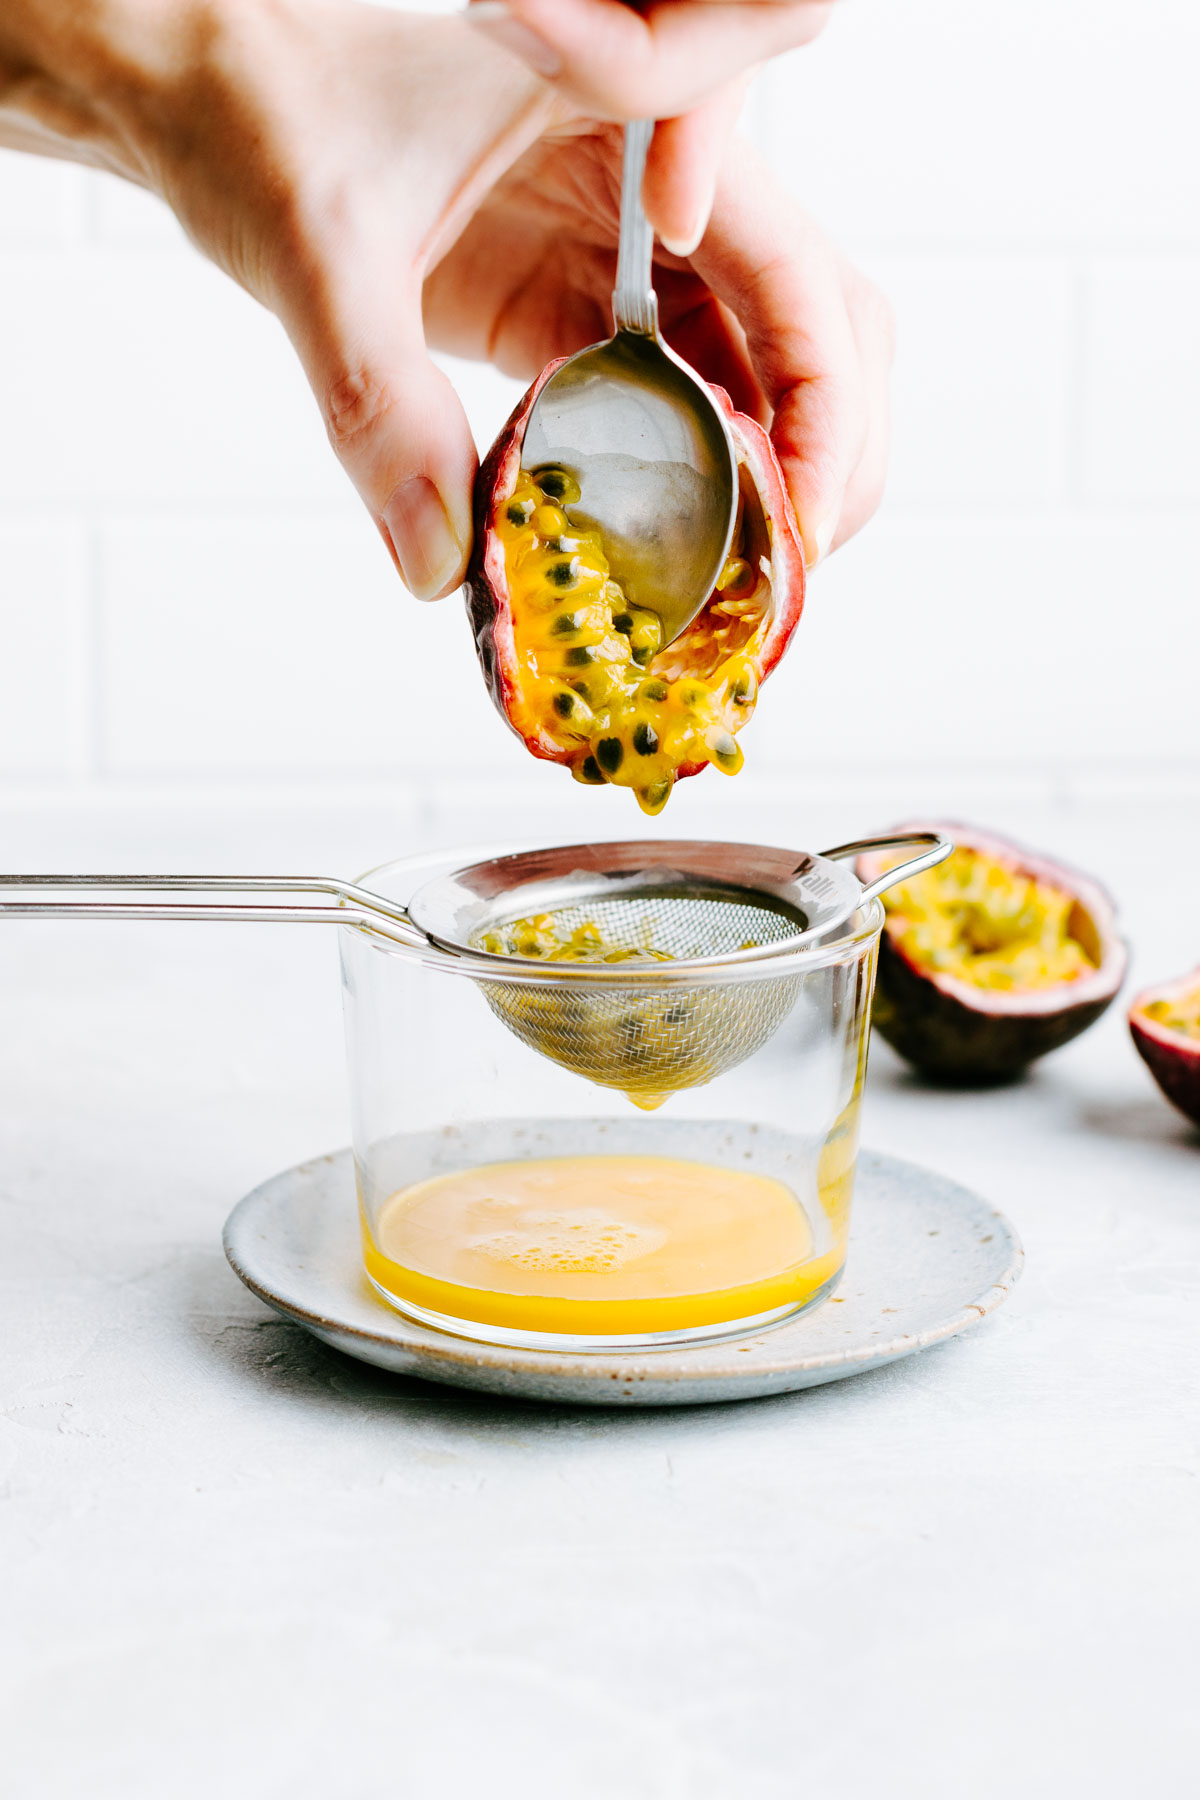 a small glass on a blue plate with a small sieve hanging in the glass and a hand scooping out the seeds and pulp form the passion fruit with a teaspoon in the sieve